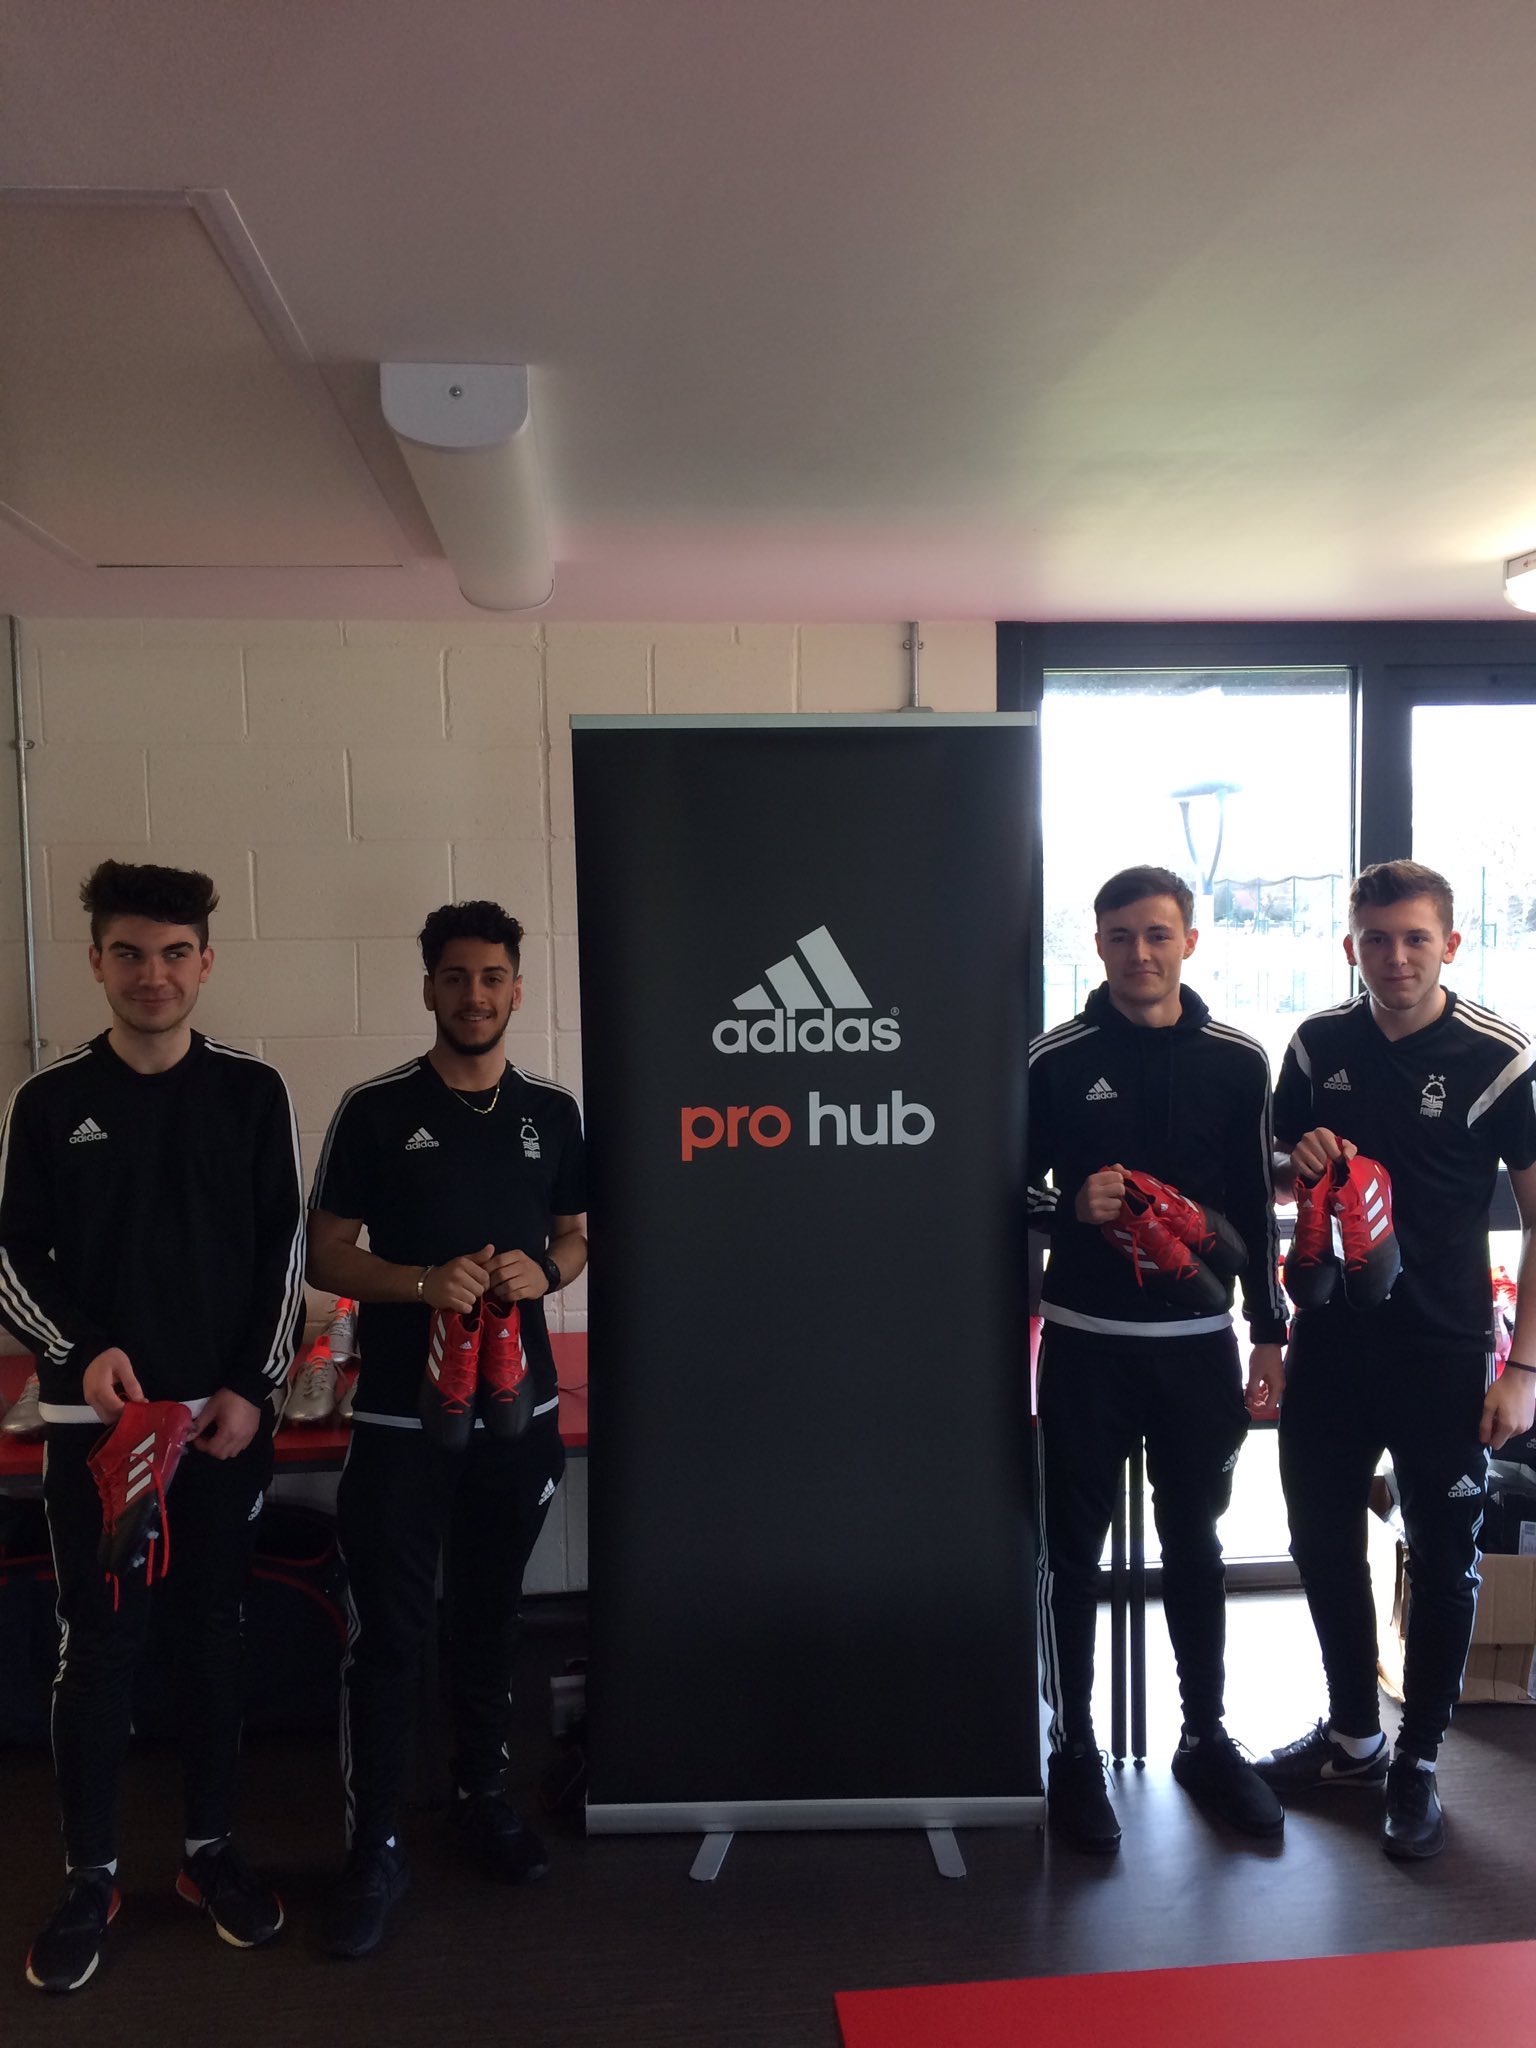 Nottingham Forest Community Trust Twitter: "Thanks to Callum at for allowing the Football Development squads to try on their new boot range. #NFFC #Adidas #ProHub Twitter